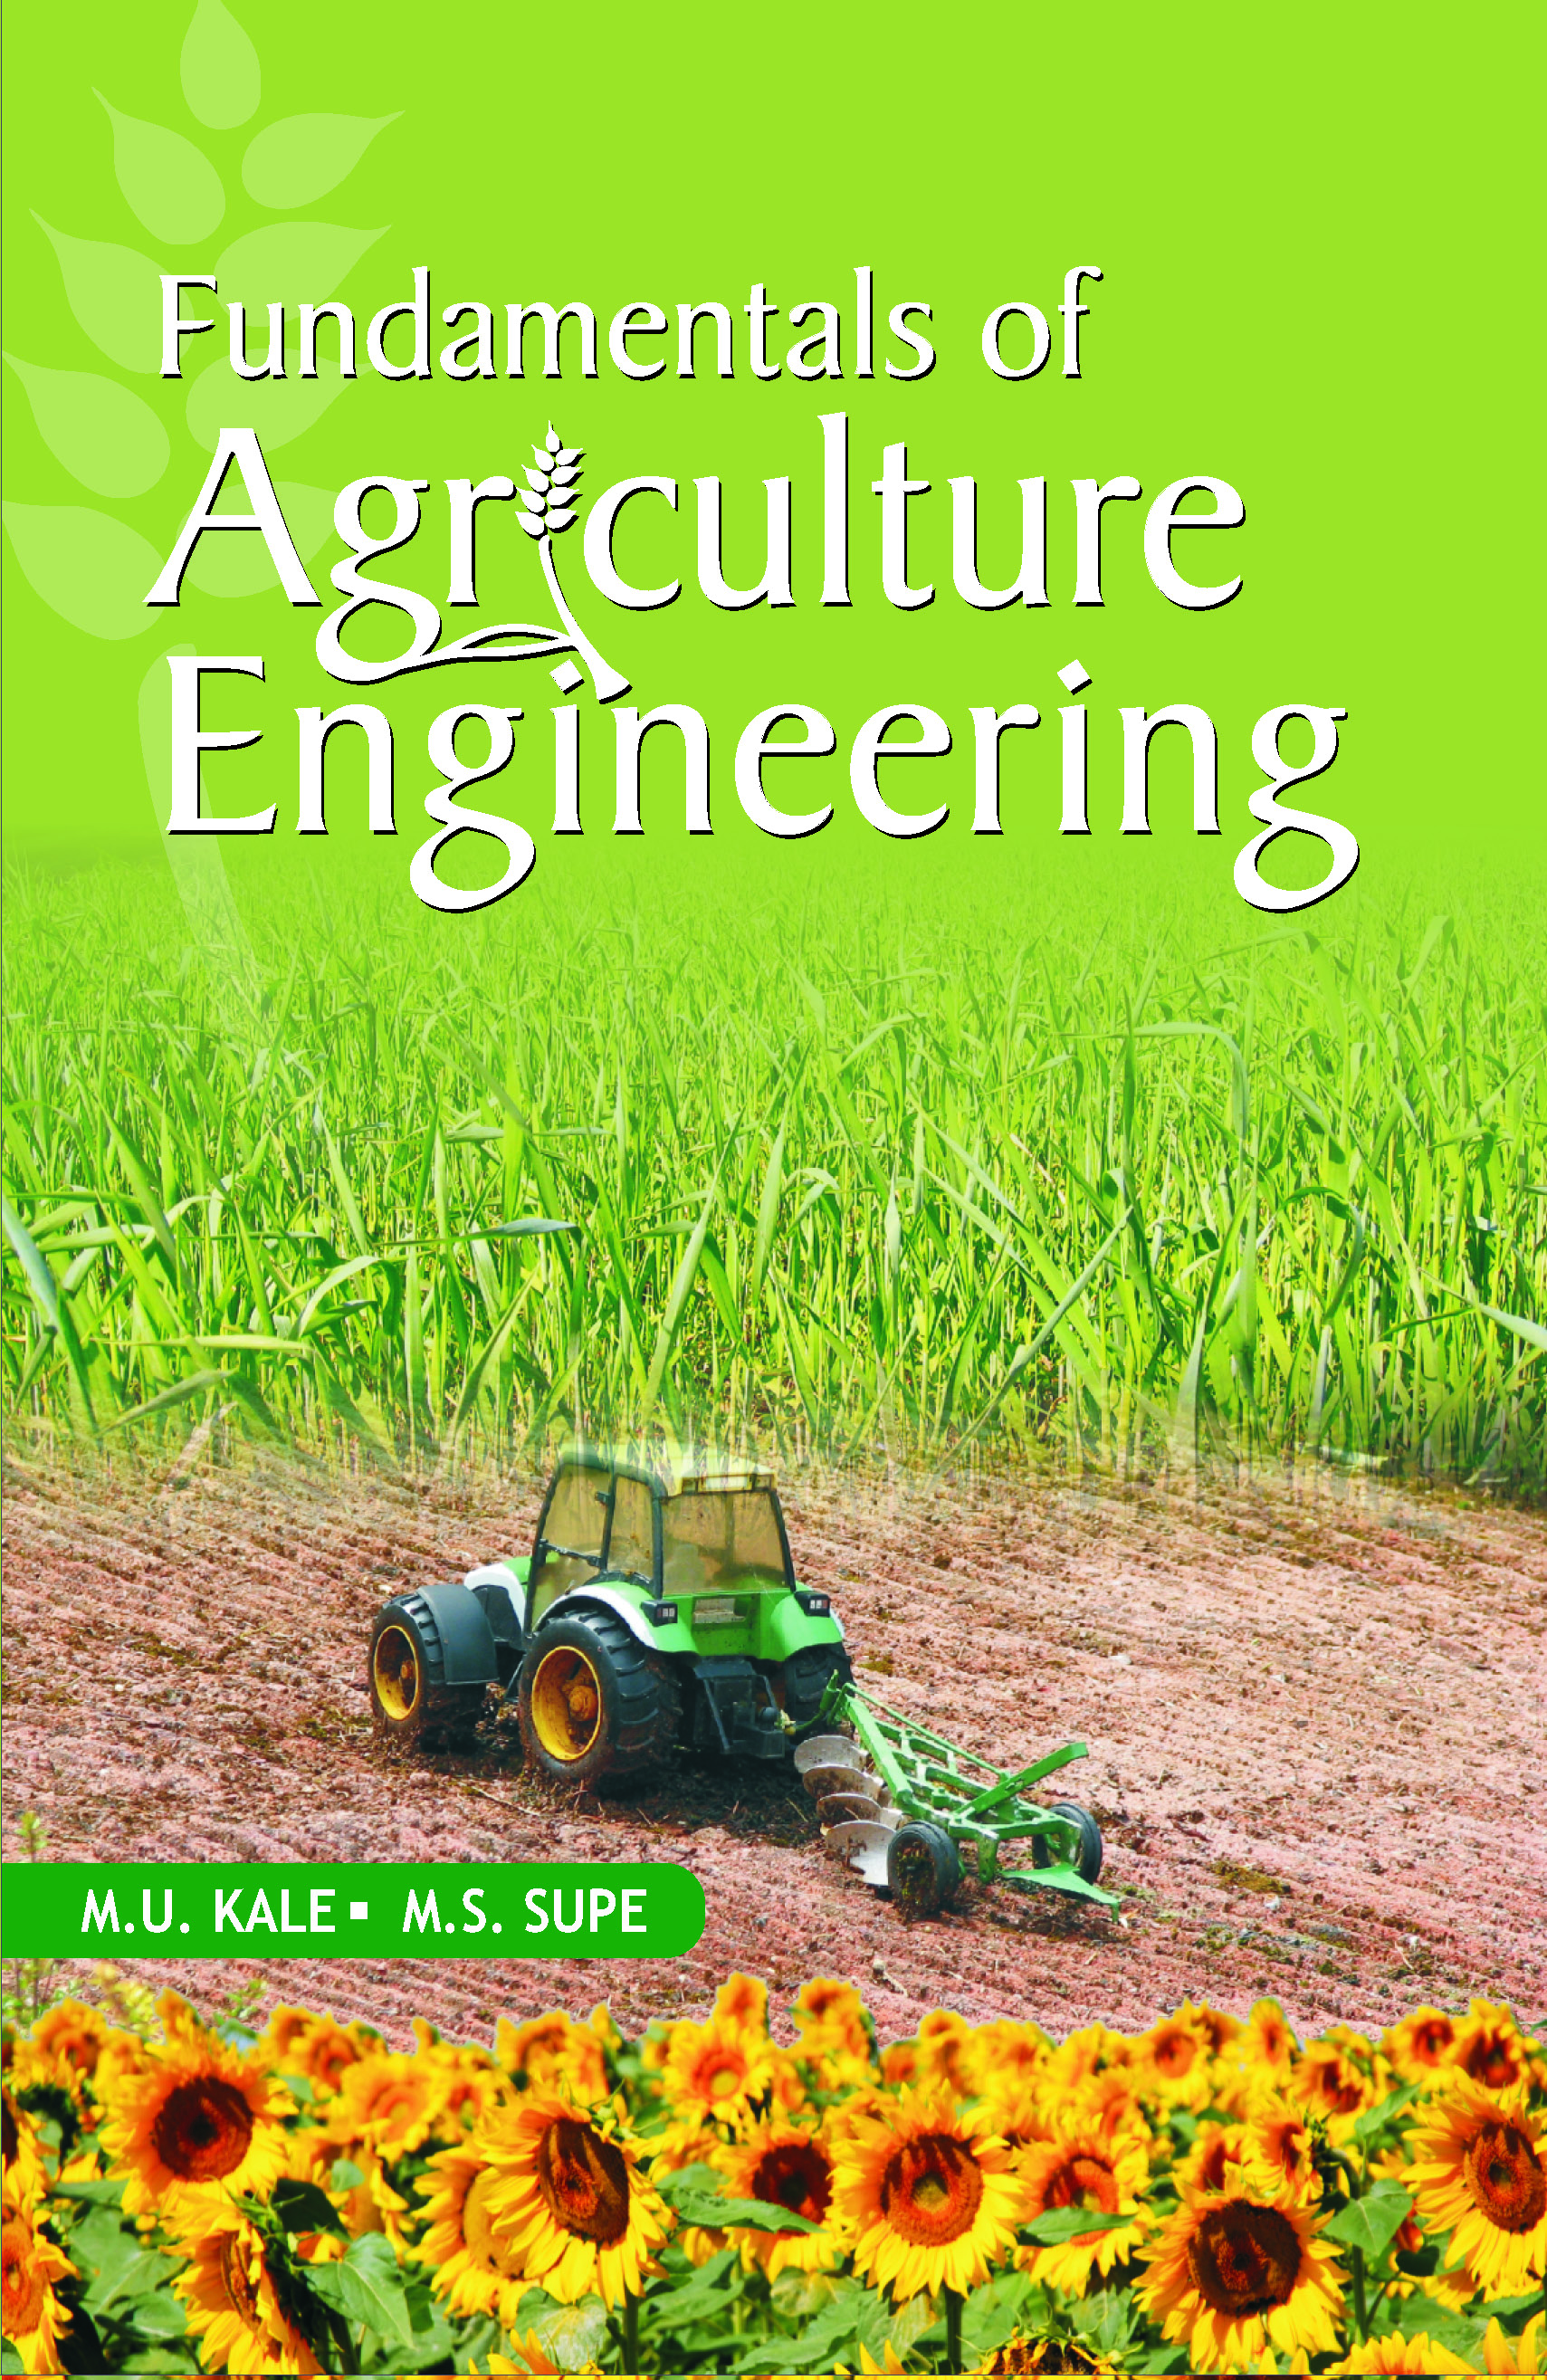 Fundamentals of Agriculture Engineering